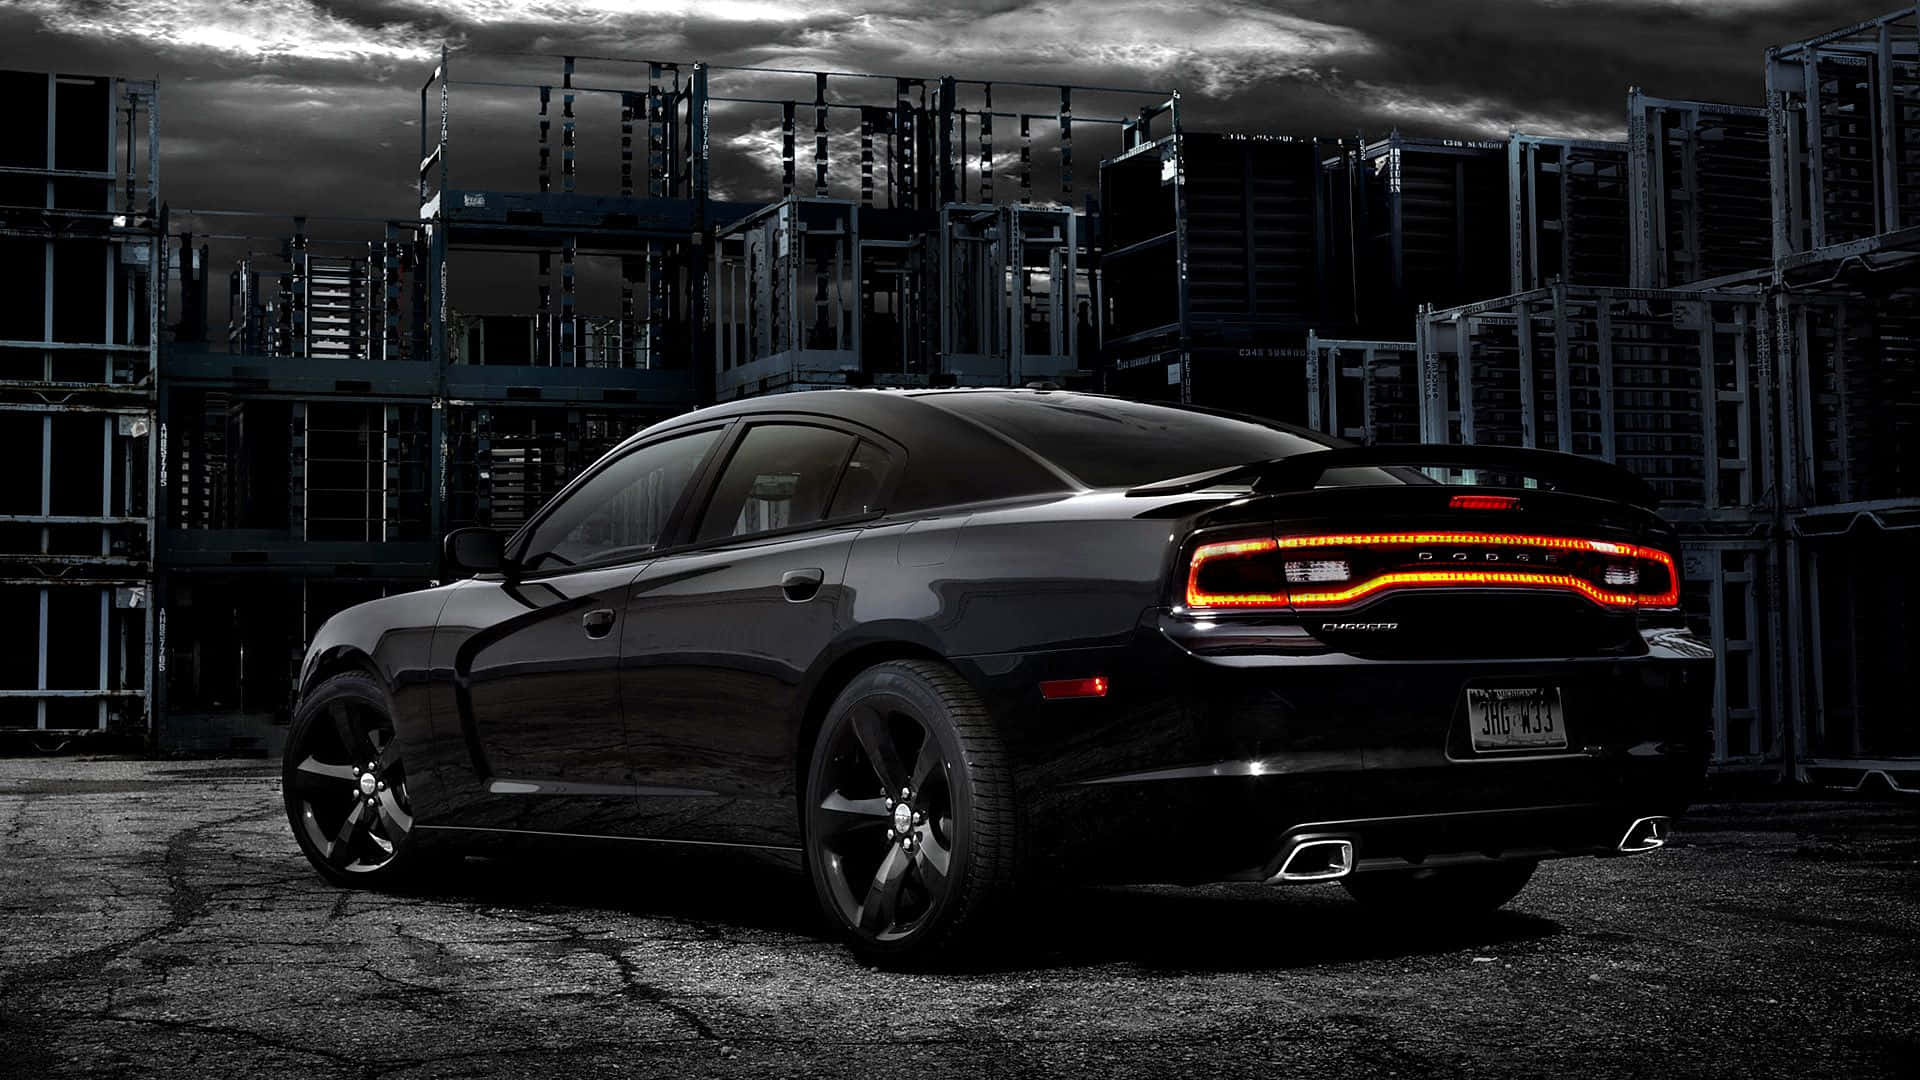 Sleek and Powerful Dodge Charger on the Road Wallpaper